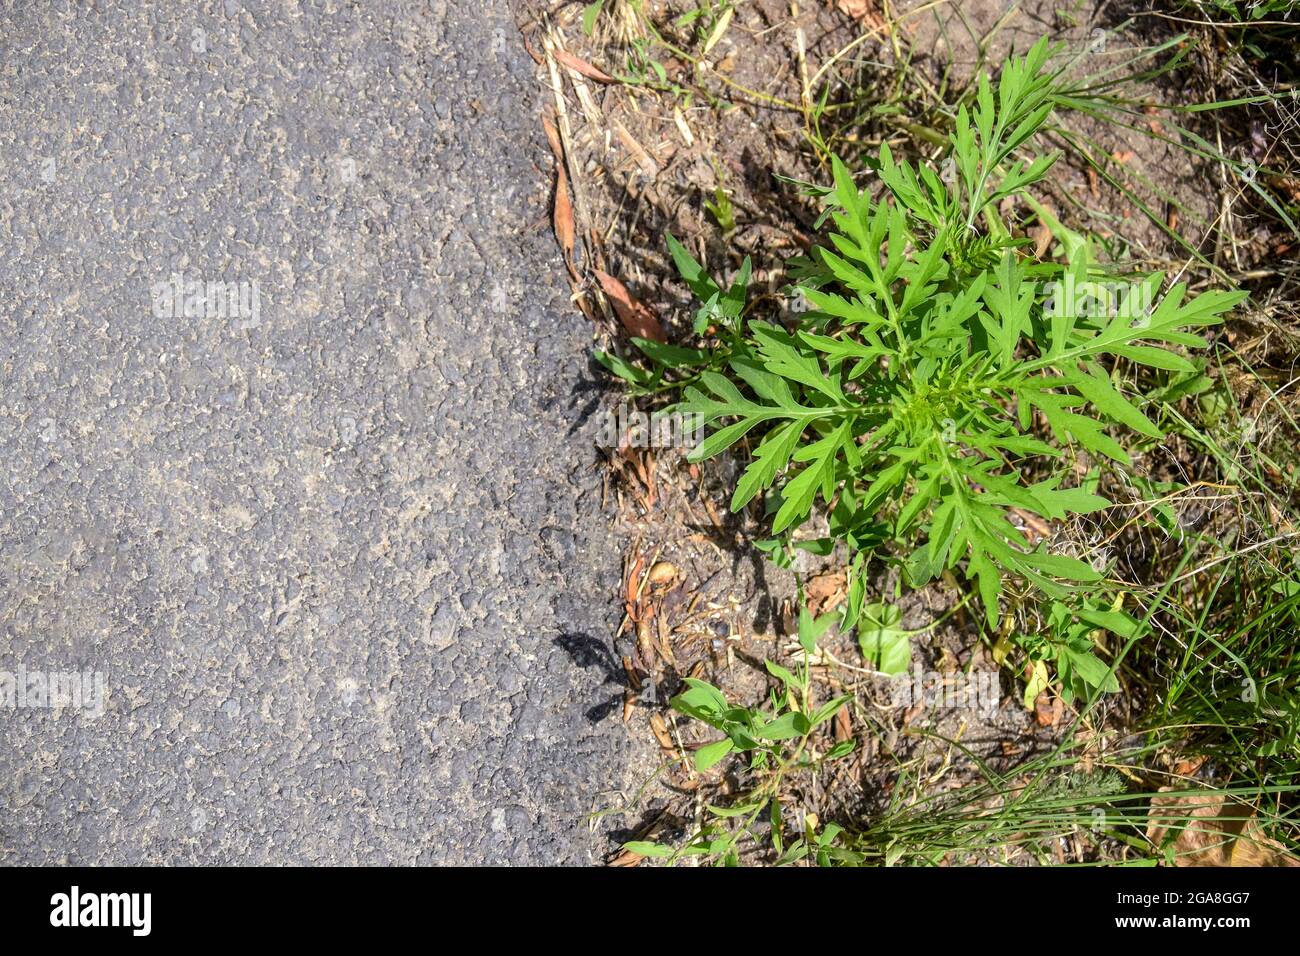 American common ragweed. Young bush have not yet bloomed ambrosia on side of asphalt road. Dangerous plant, Ambrosia shrubs Stock Photo